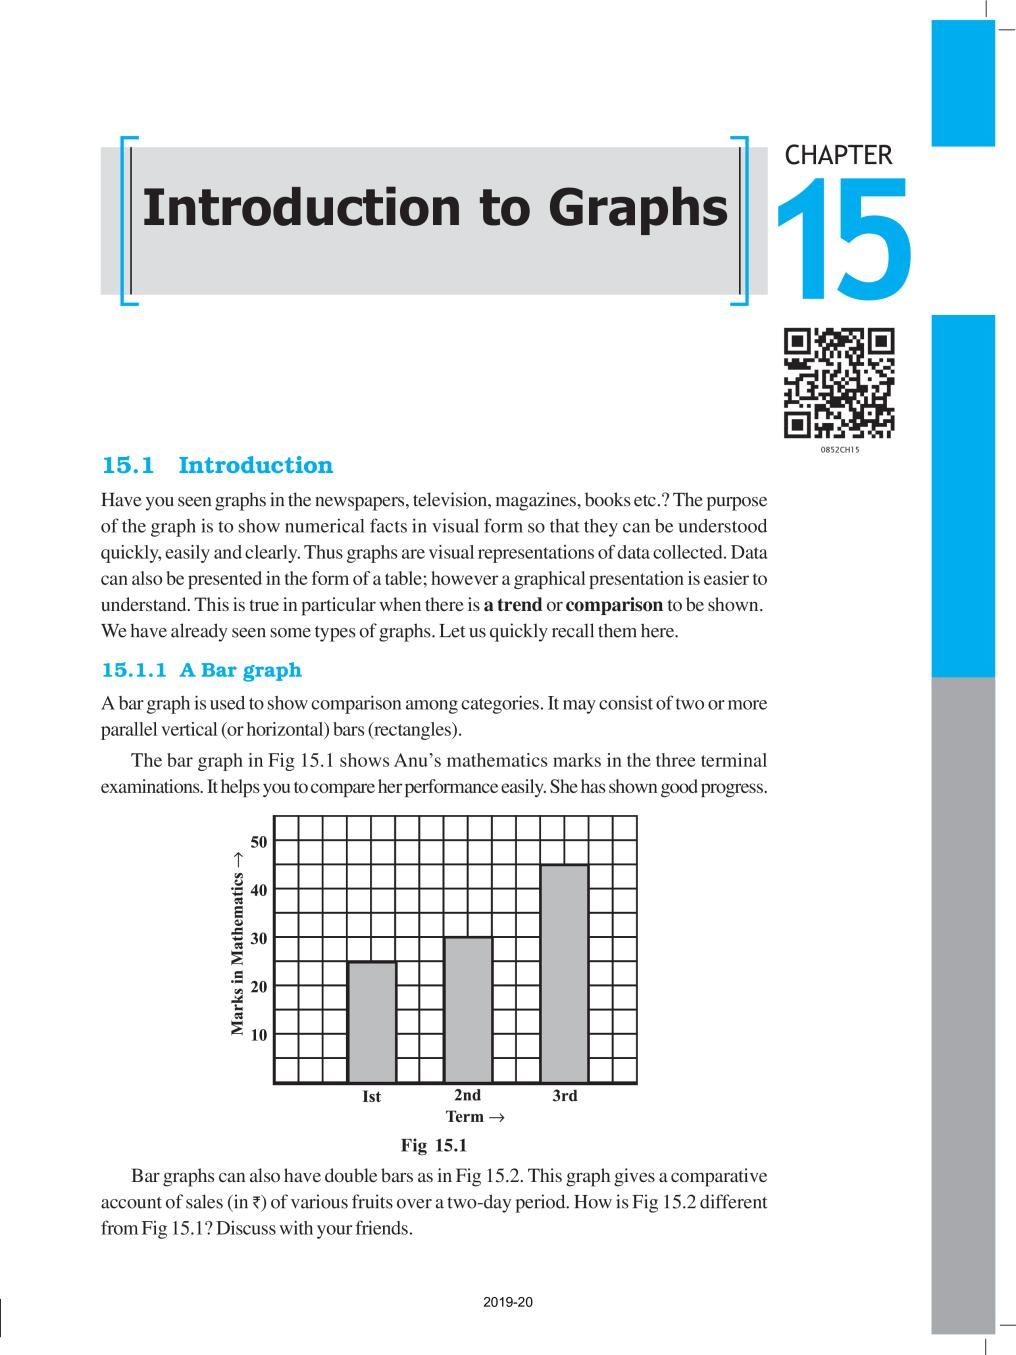 NCERT Book Class 8 Maths Chapter 15 Introduction to Graphs - Page 1